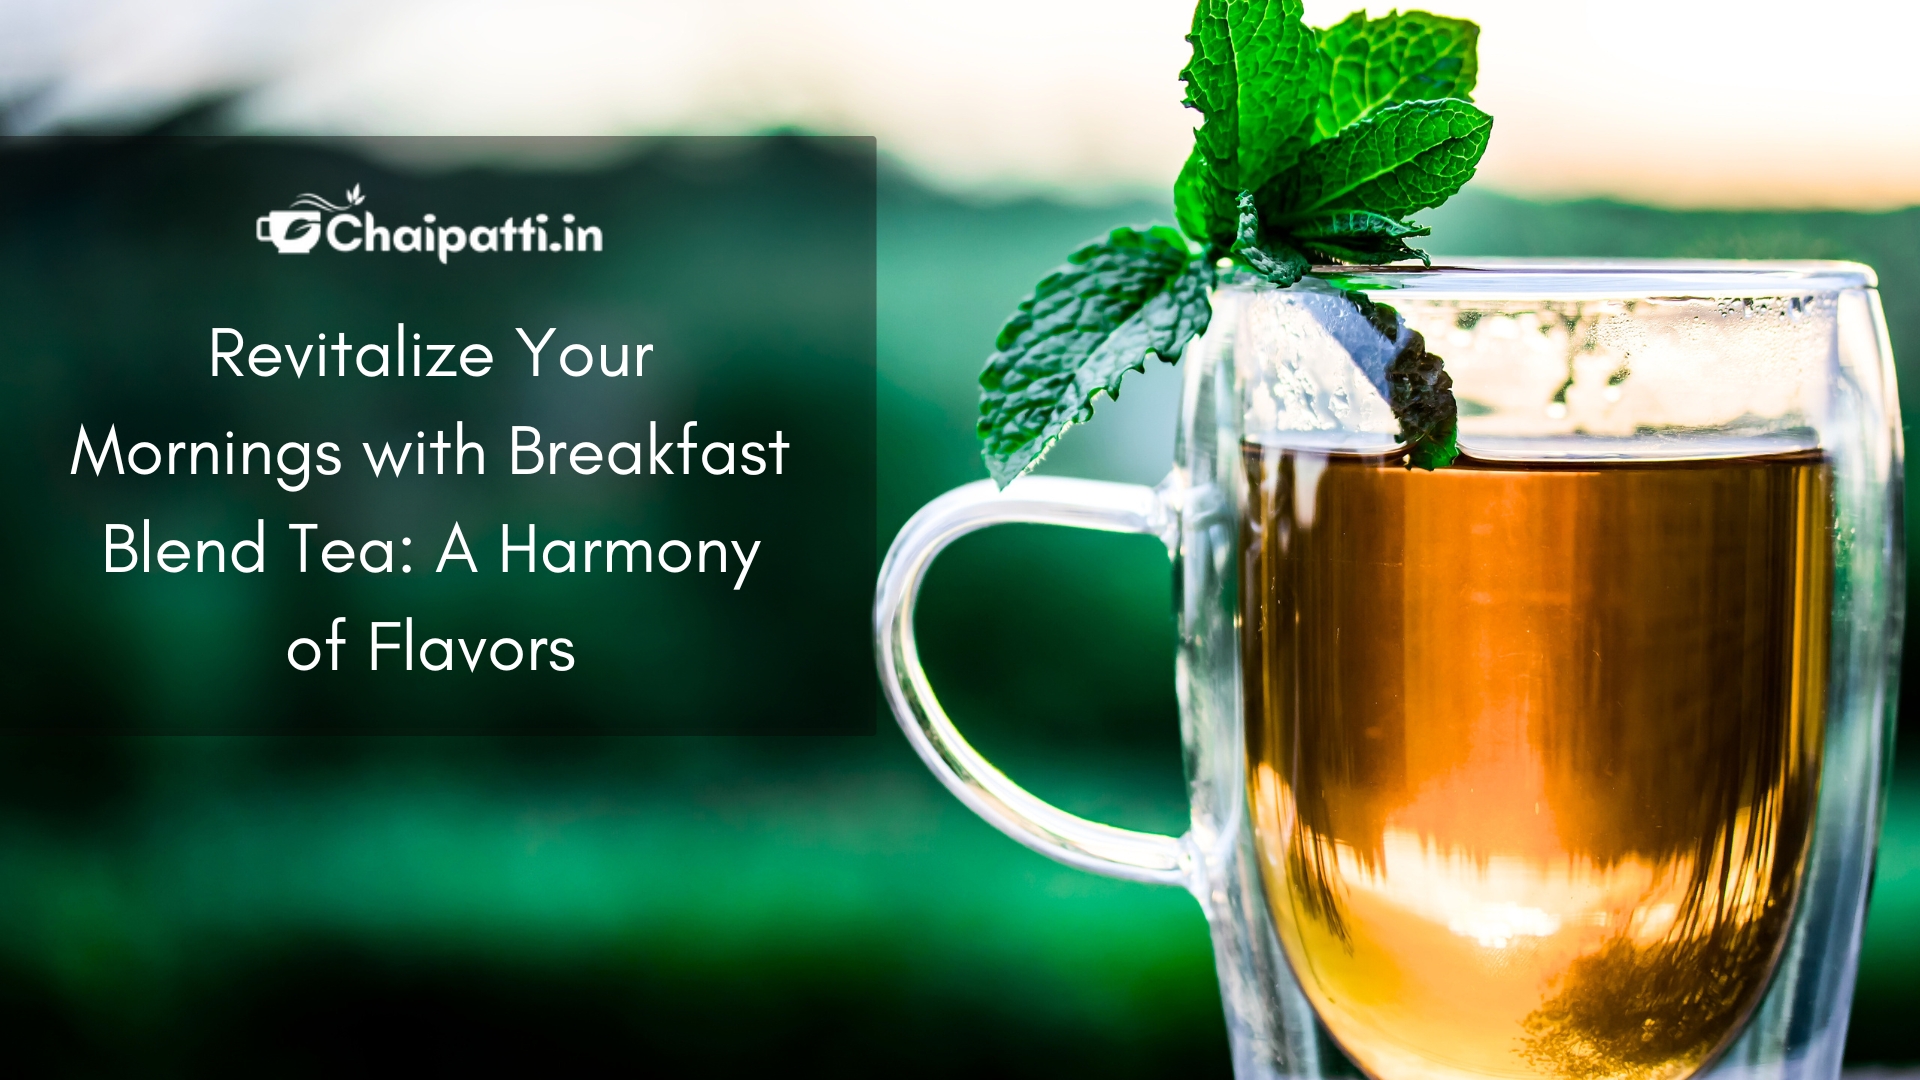 Revitalize Your Mornings with Breakfast Blend Tea: A Harmony of Flavors